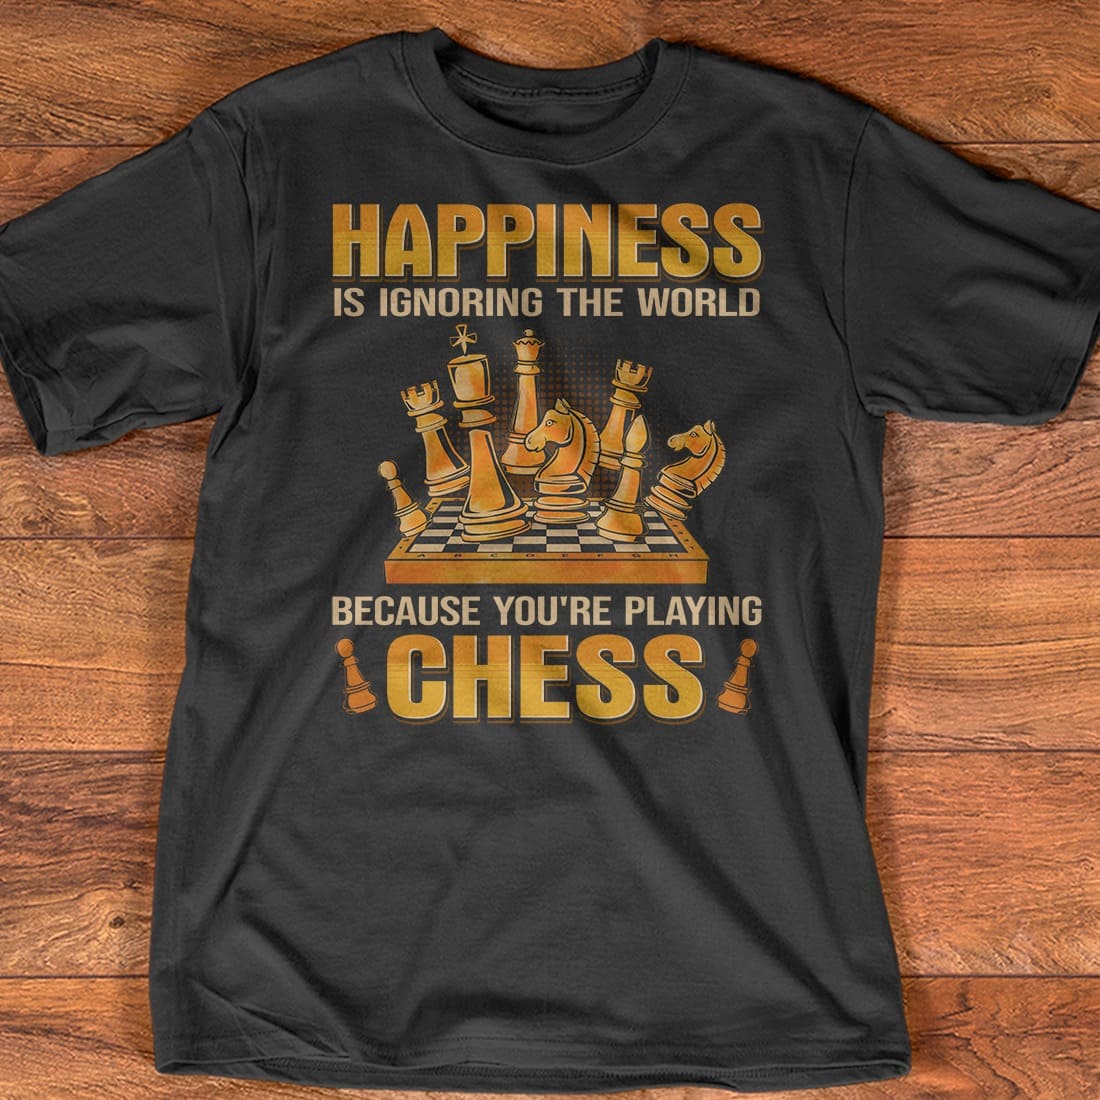 Happiness is ignoring the world because you're playing chess - Chess player T-shirt